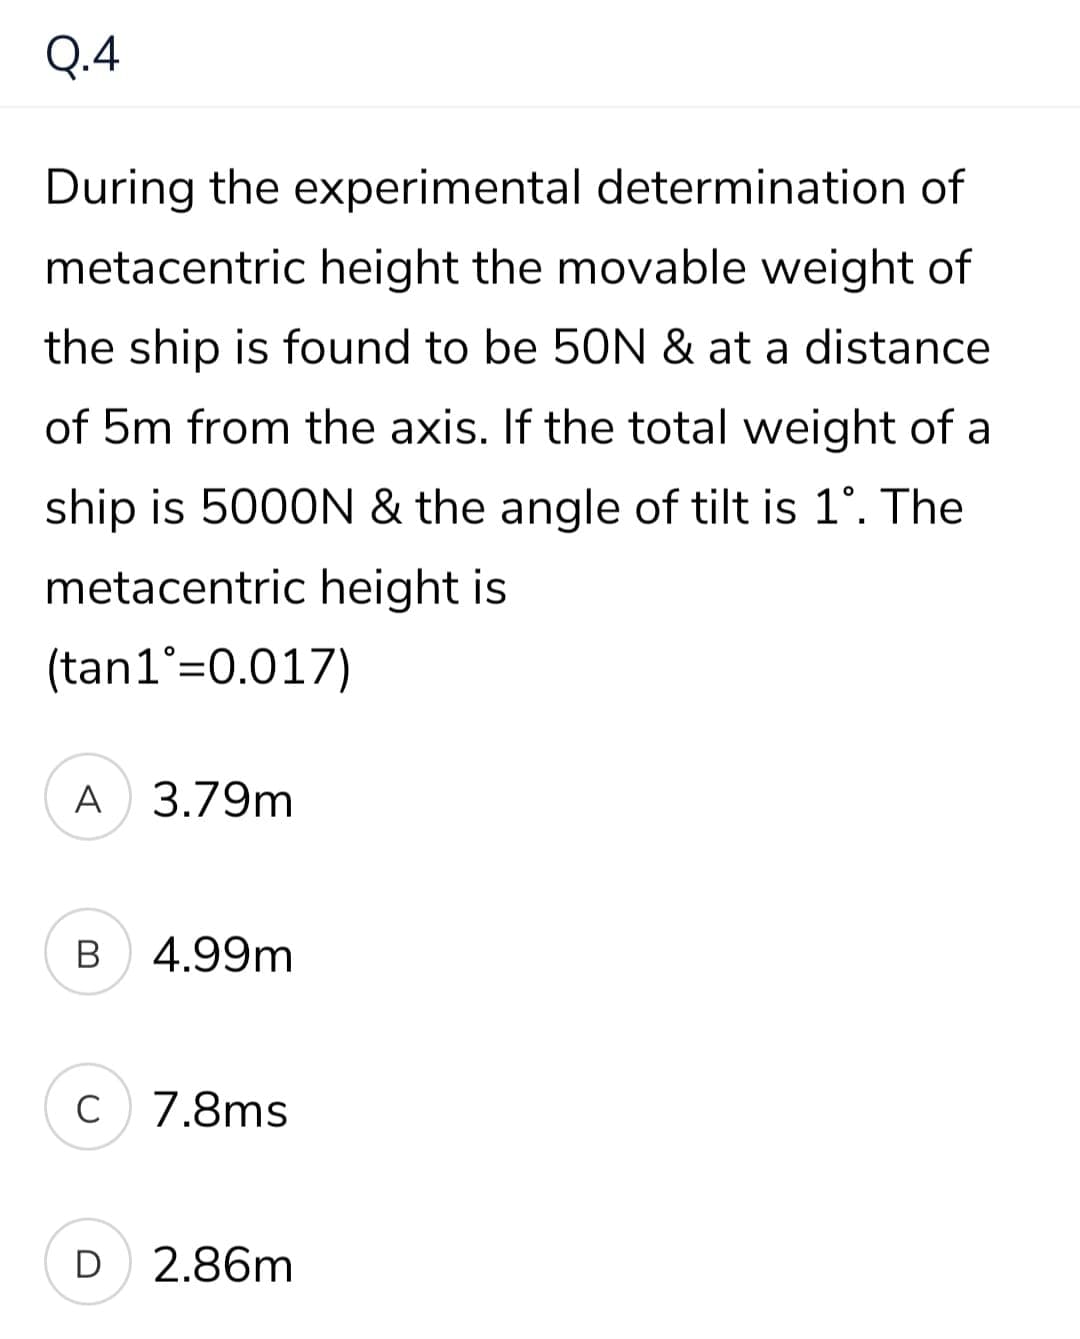 Q.4
During the experimental determination of
metacentric height the movable weight of
the ship is found to be 50N & at a distance
of 5m from the axis. If the total weight of a
ship is 5000N & the angle of tilt is 1°. The
metacentric height is
(tan1°=0.017)
A 3.79m
В
4.99m
C
c 7.8ms
D 2.86m
